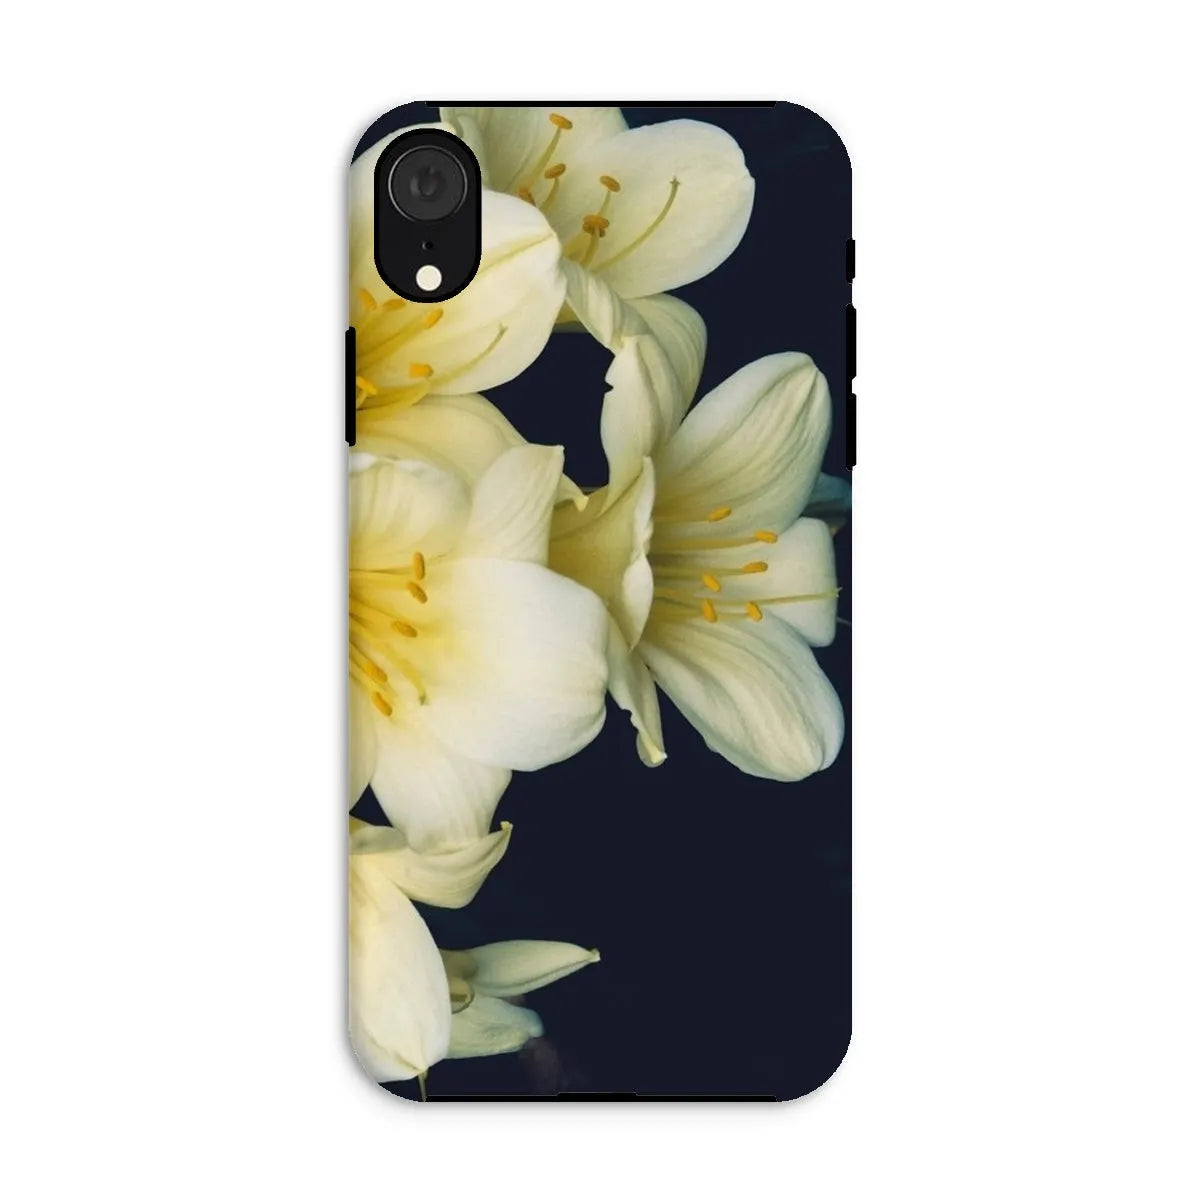 Flower Power Too Tough Phone Case - Iphone Xr / Matte - Mobile Phone Cases - Aesthetic Art